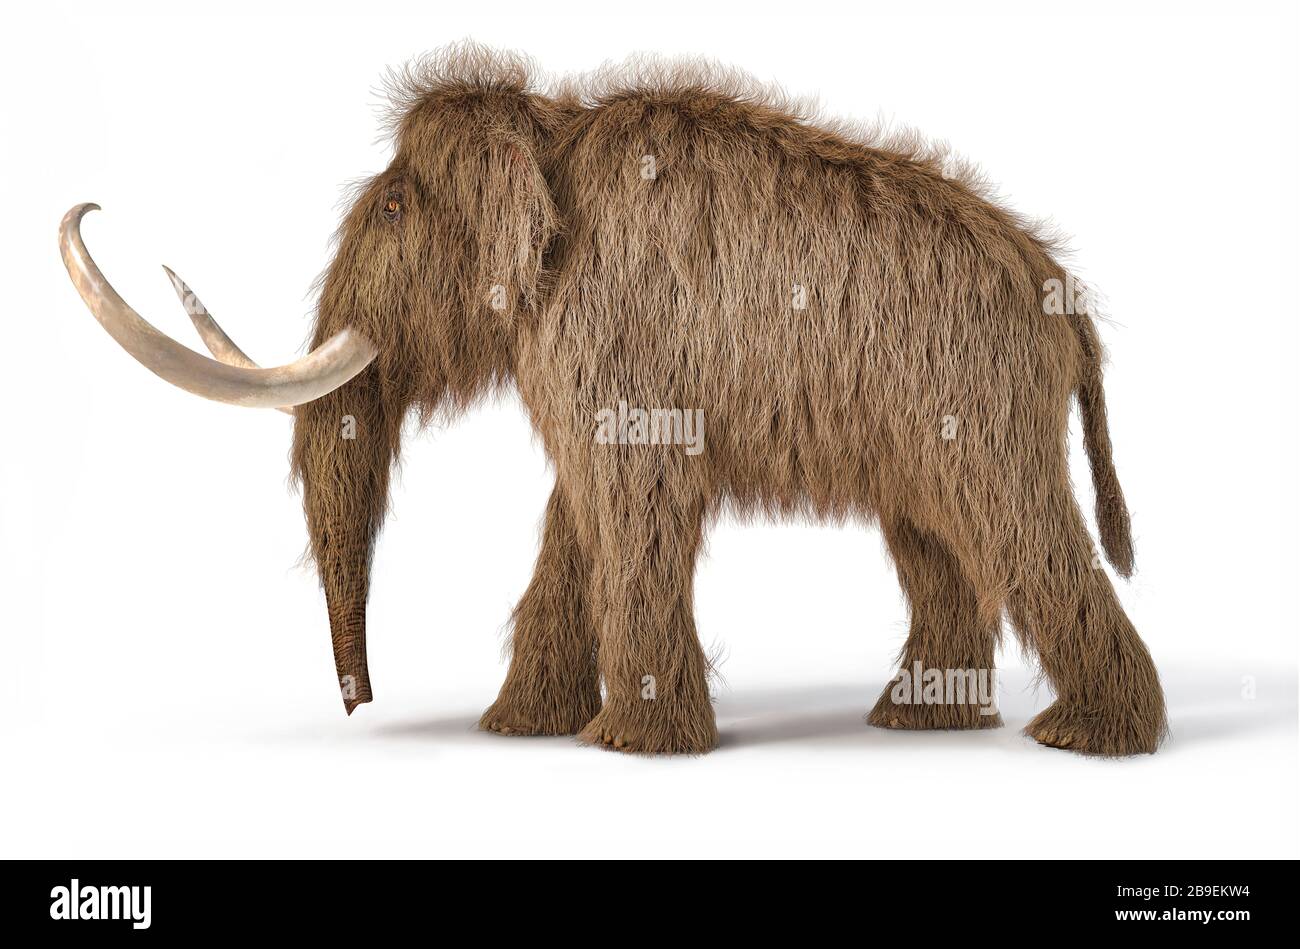 3D illustration of woolly mammoth on white background. Stock Photo